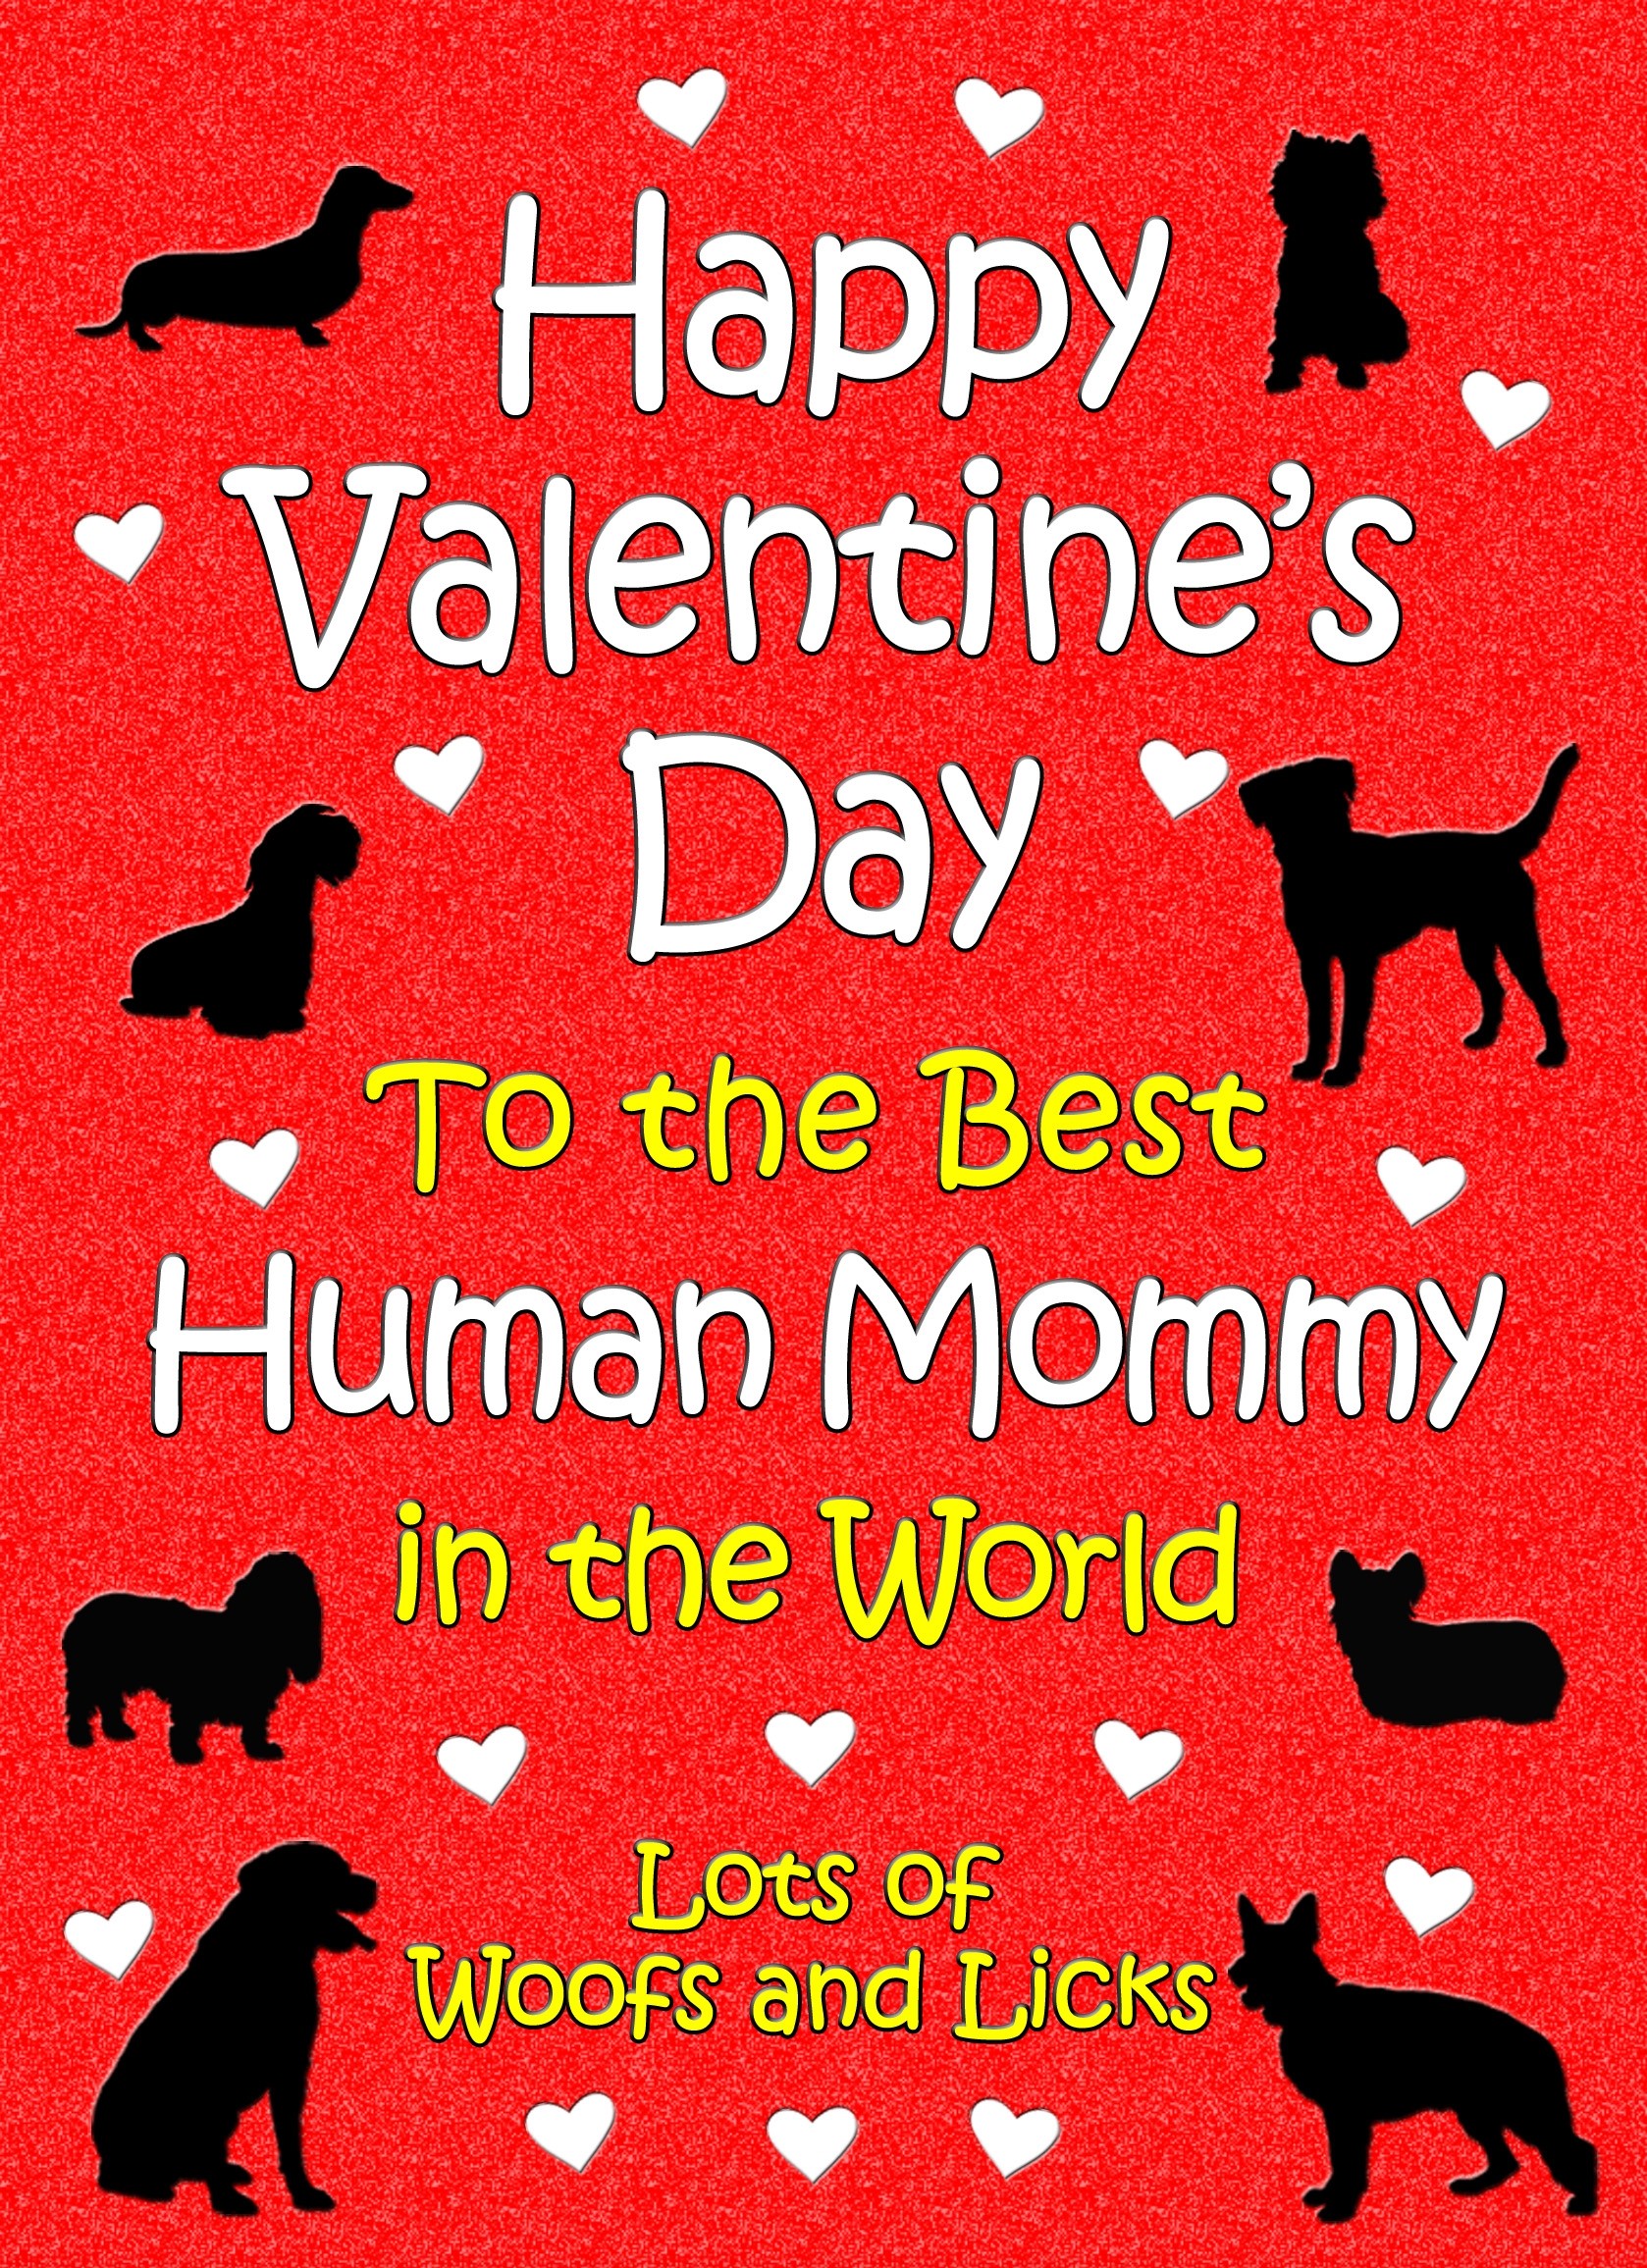 From The Dog Valentines Day Card (Human Mommy)